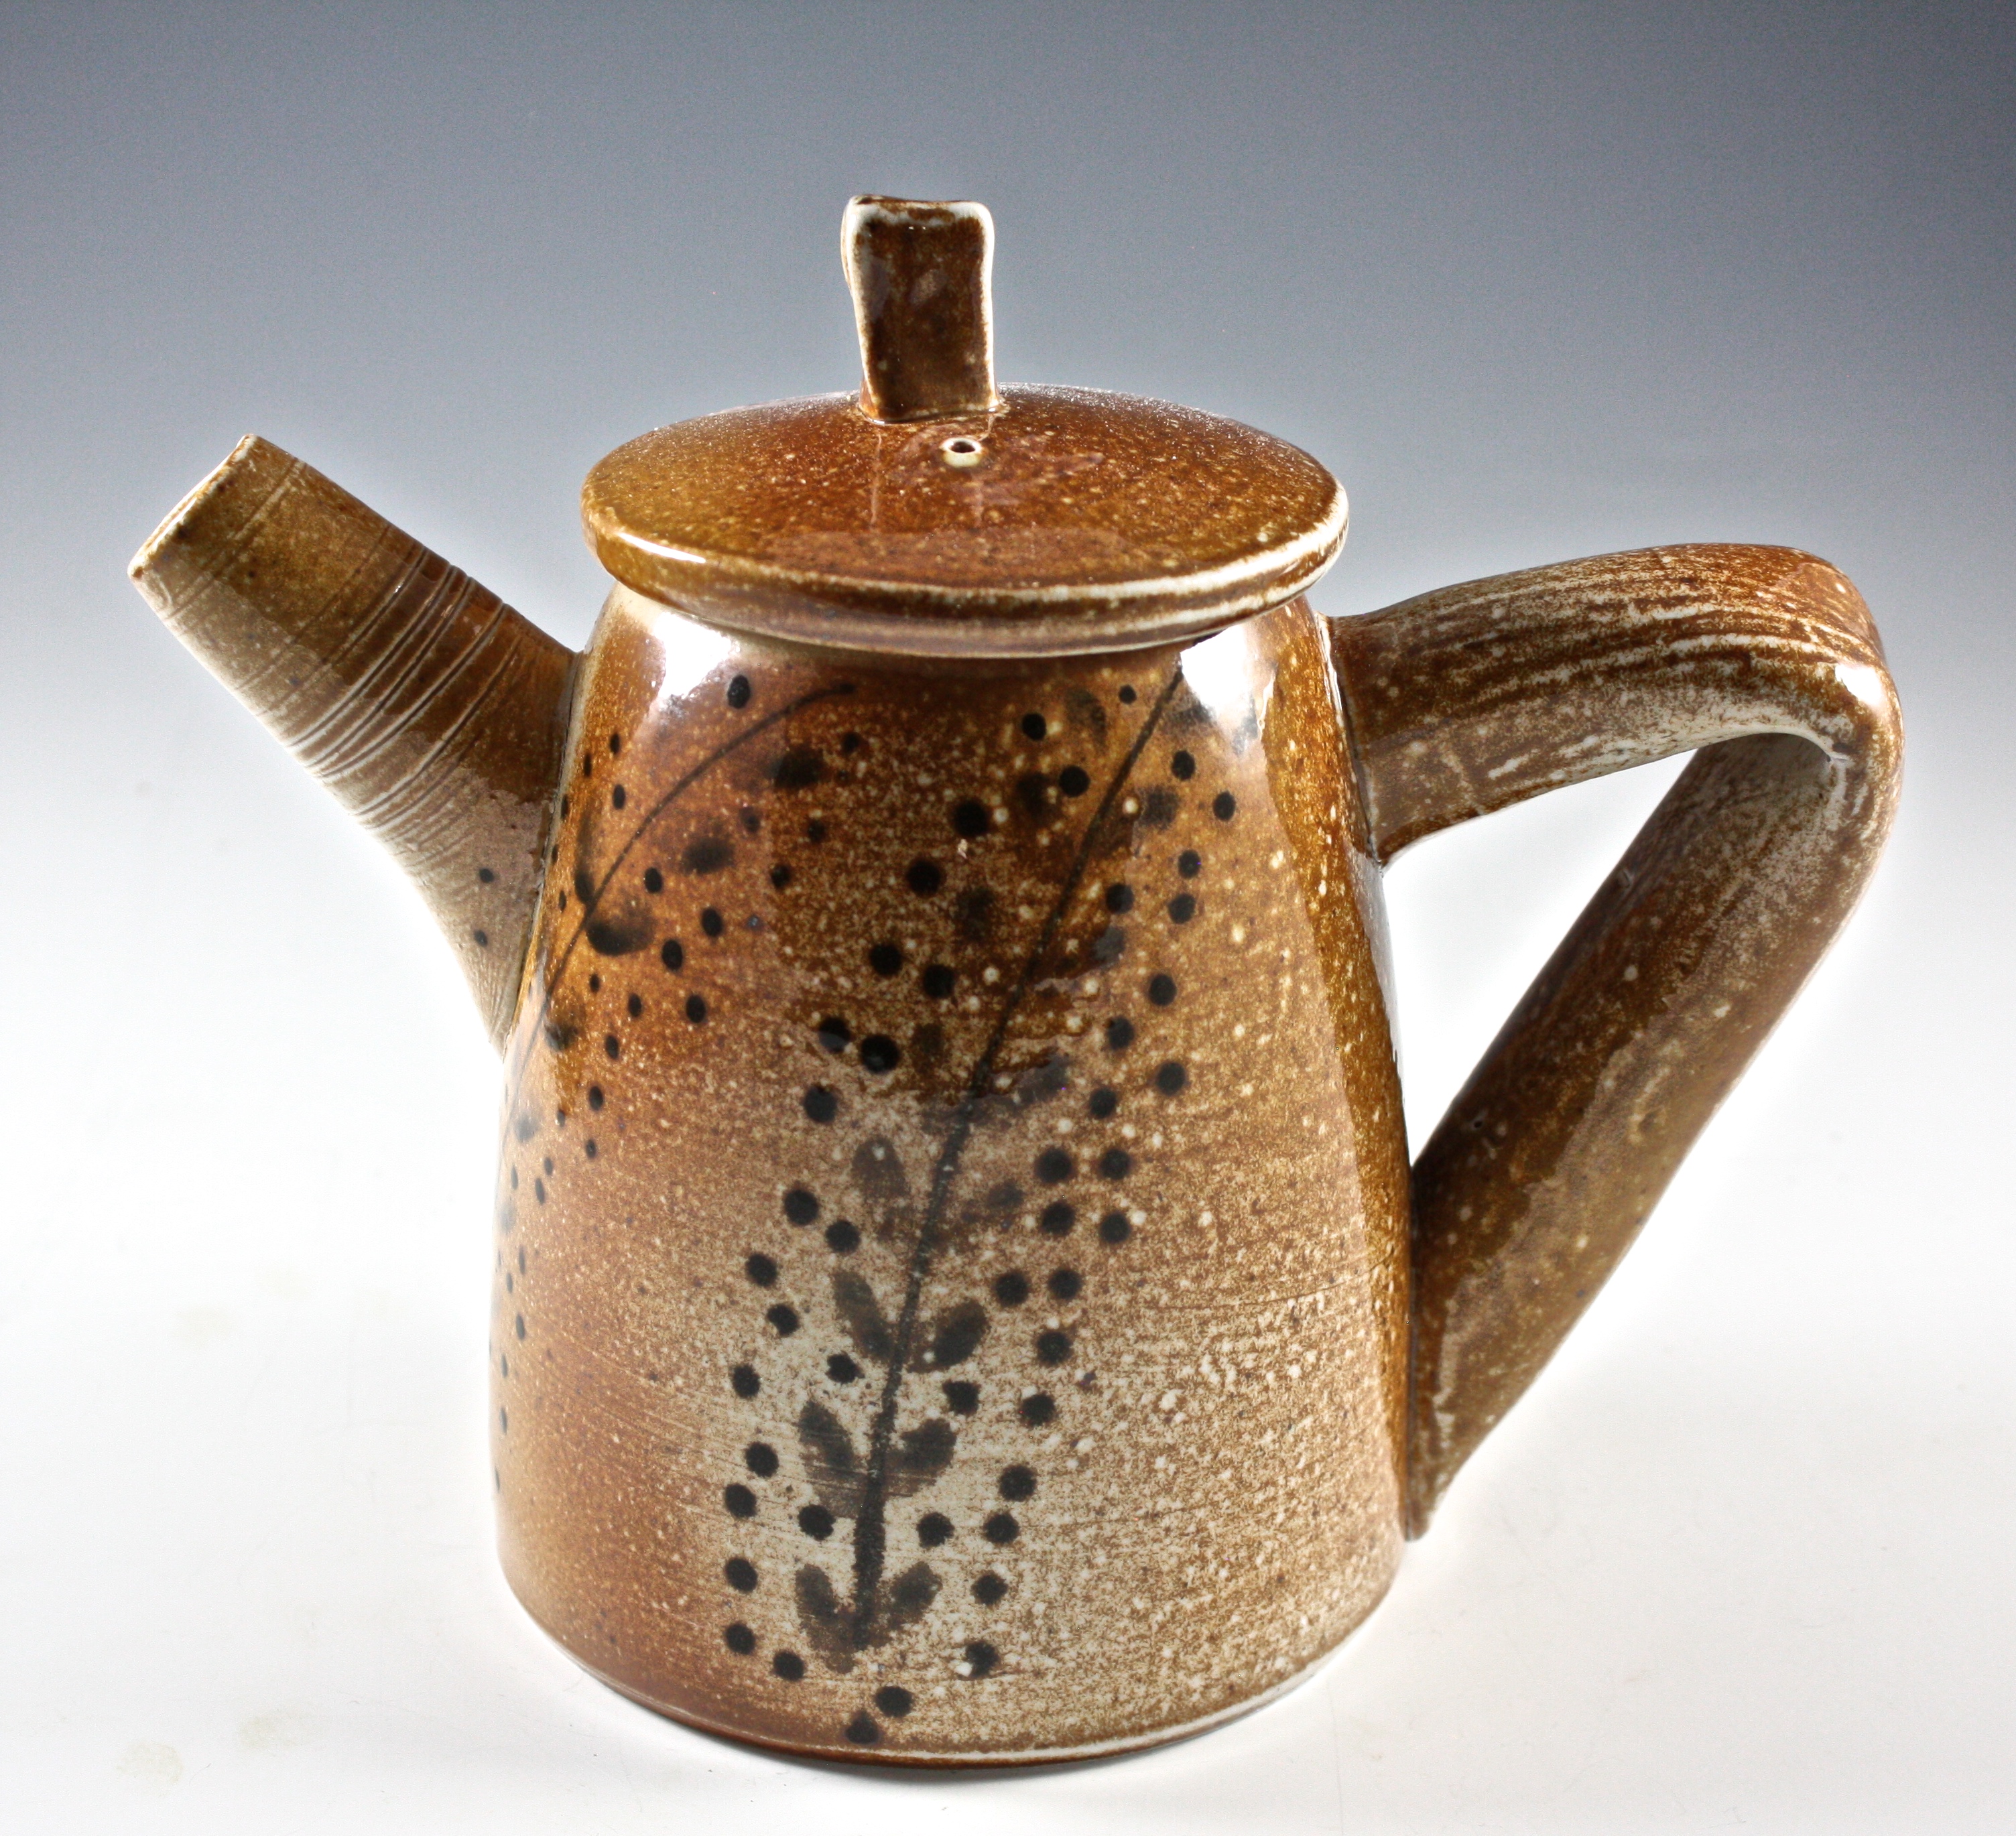 Tall Teapot with Black Leaf Design